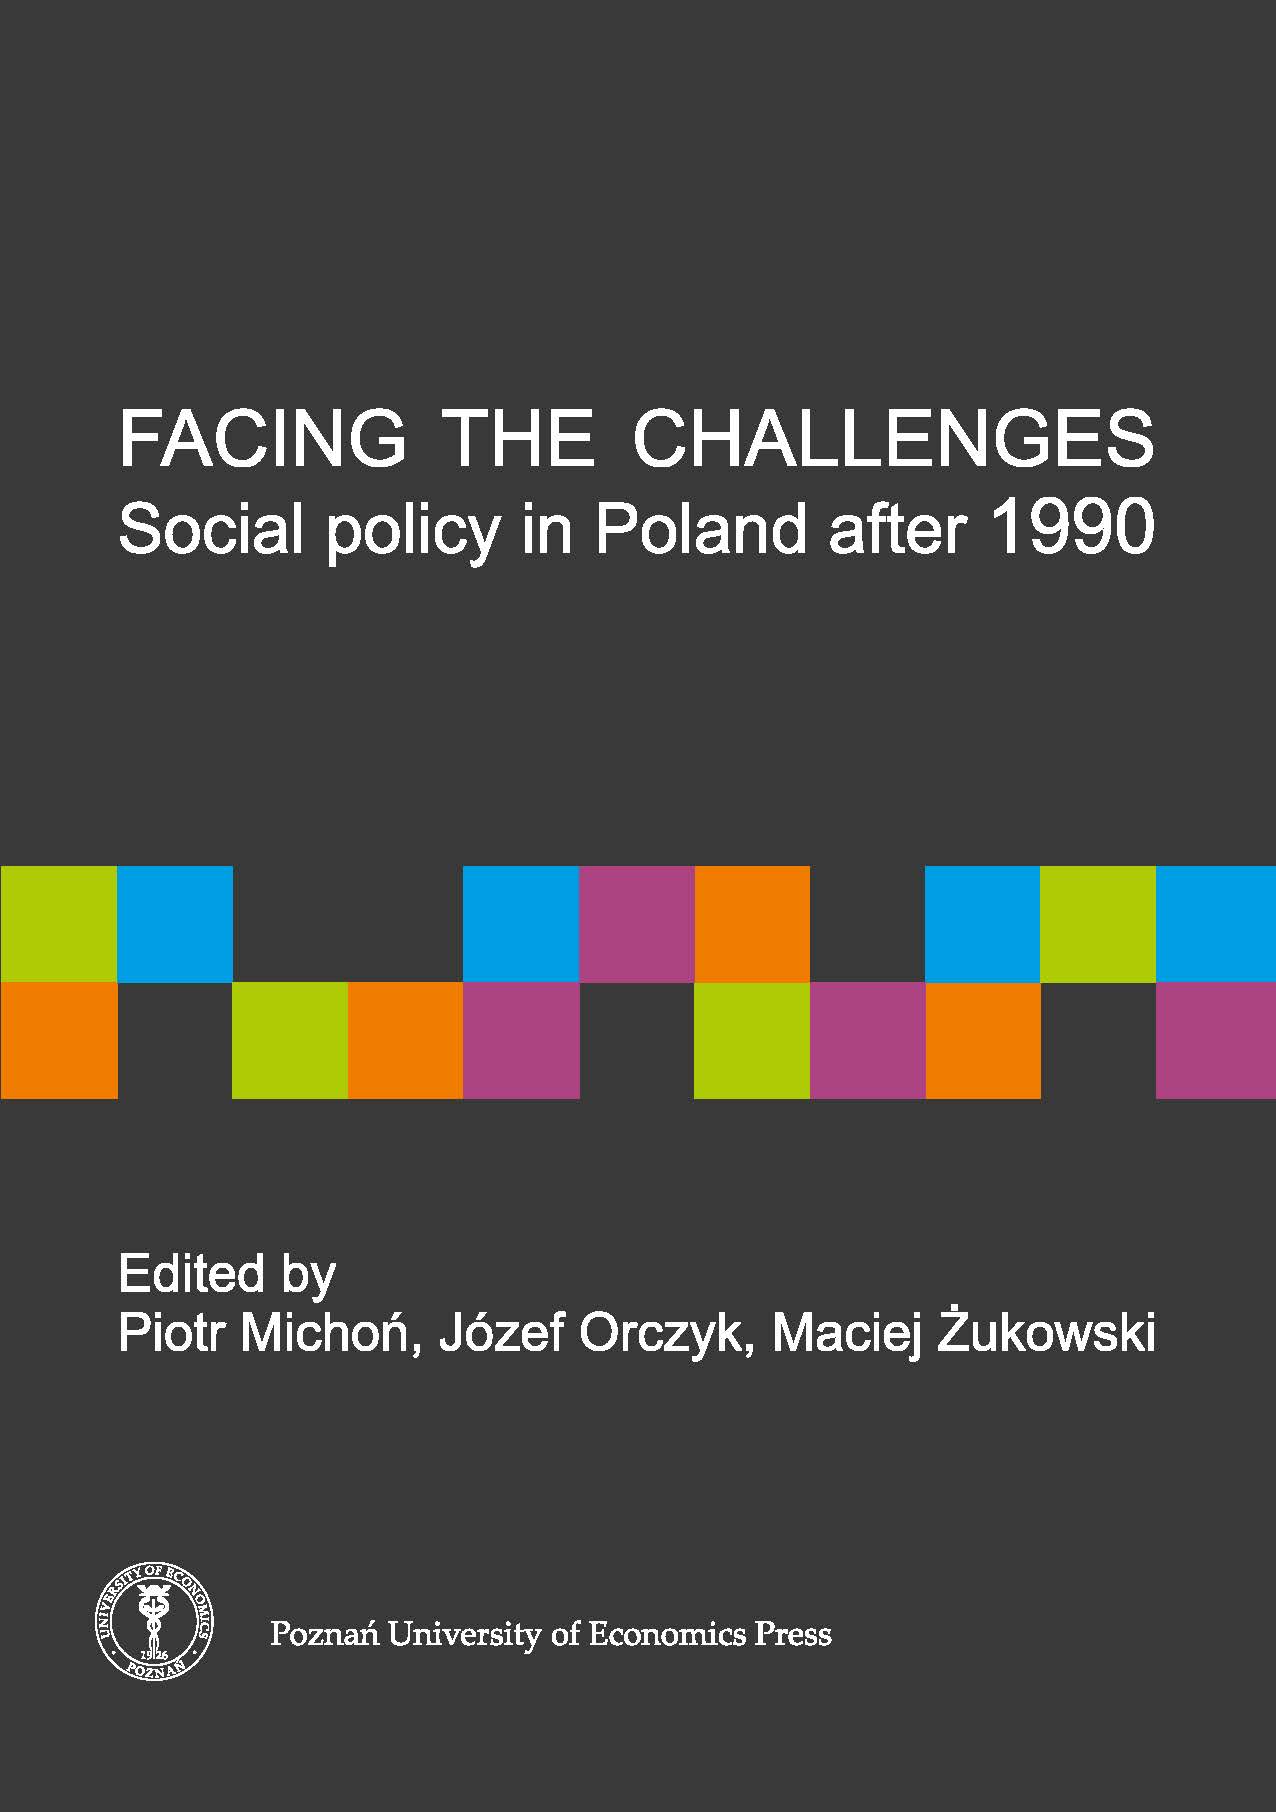 Social work and social workers in Poland